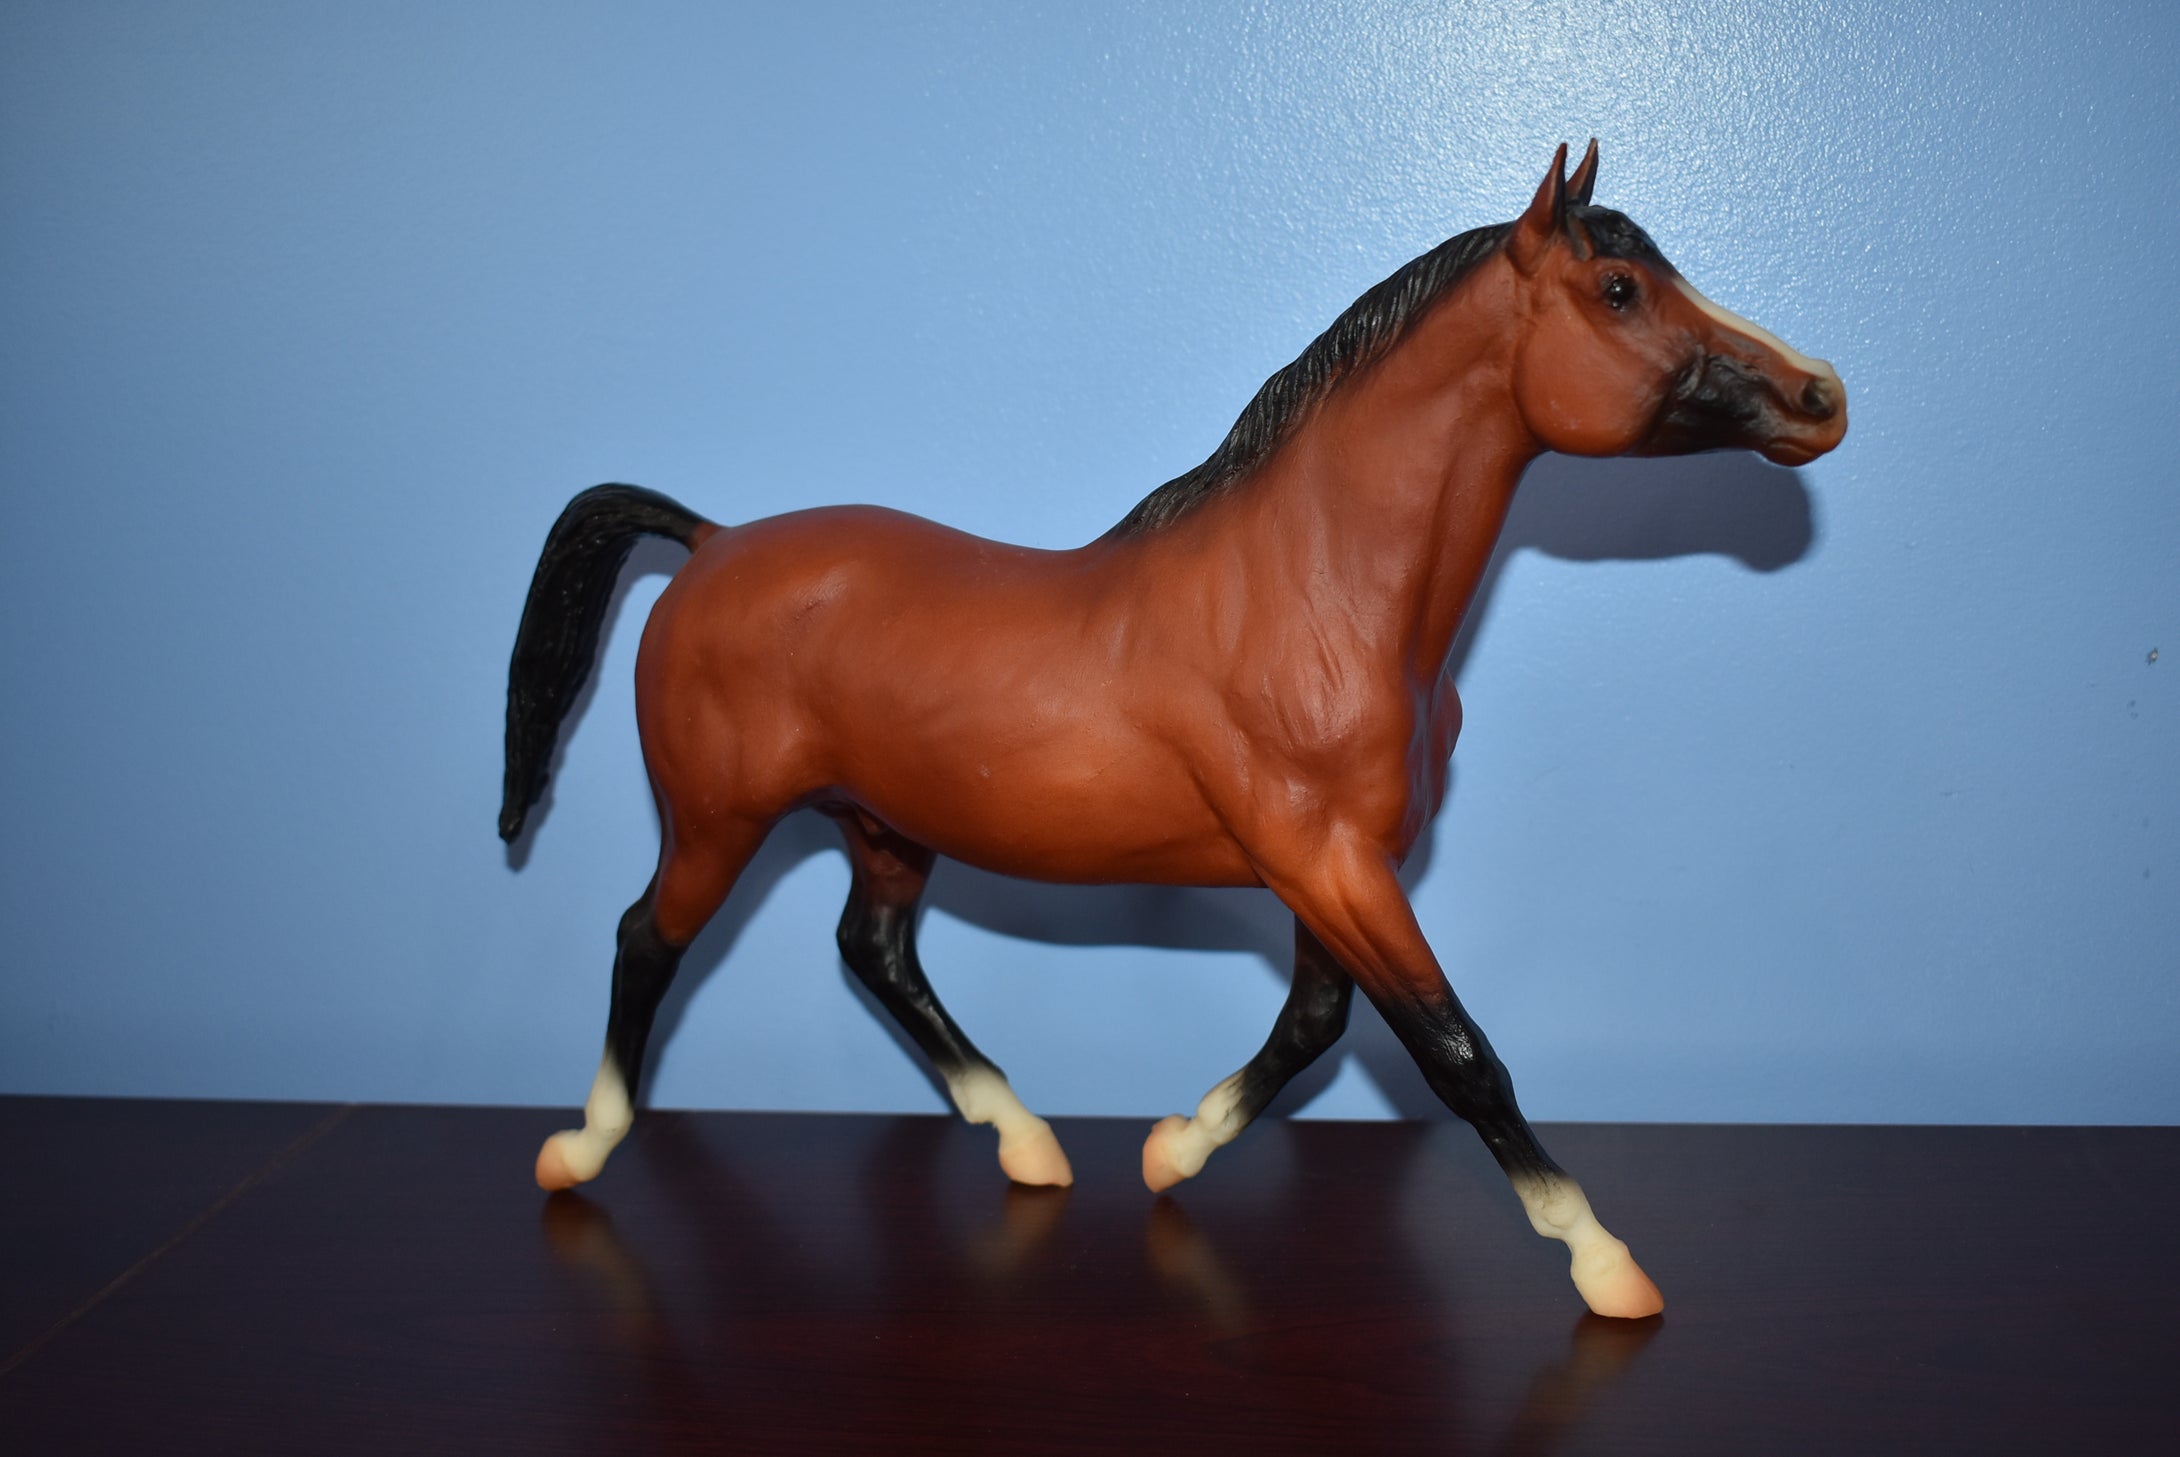 Horse Salute Gift Set Morganzlanz Only-Morganglanz Mold-JC Penney Holiday Catalog Exclusive-Breyer Traditional